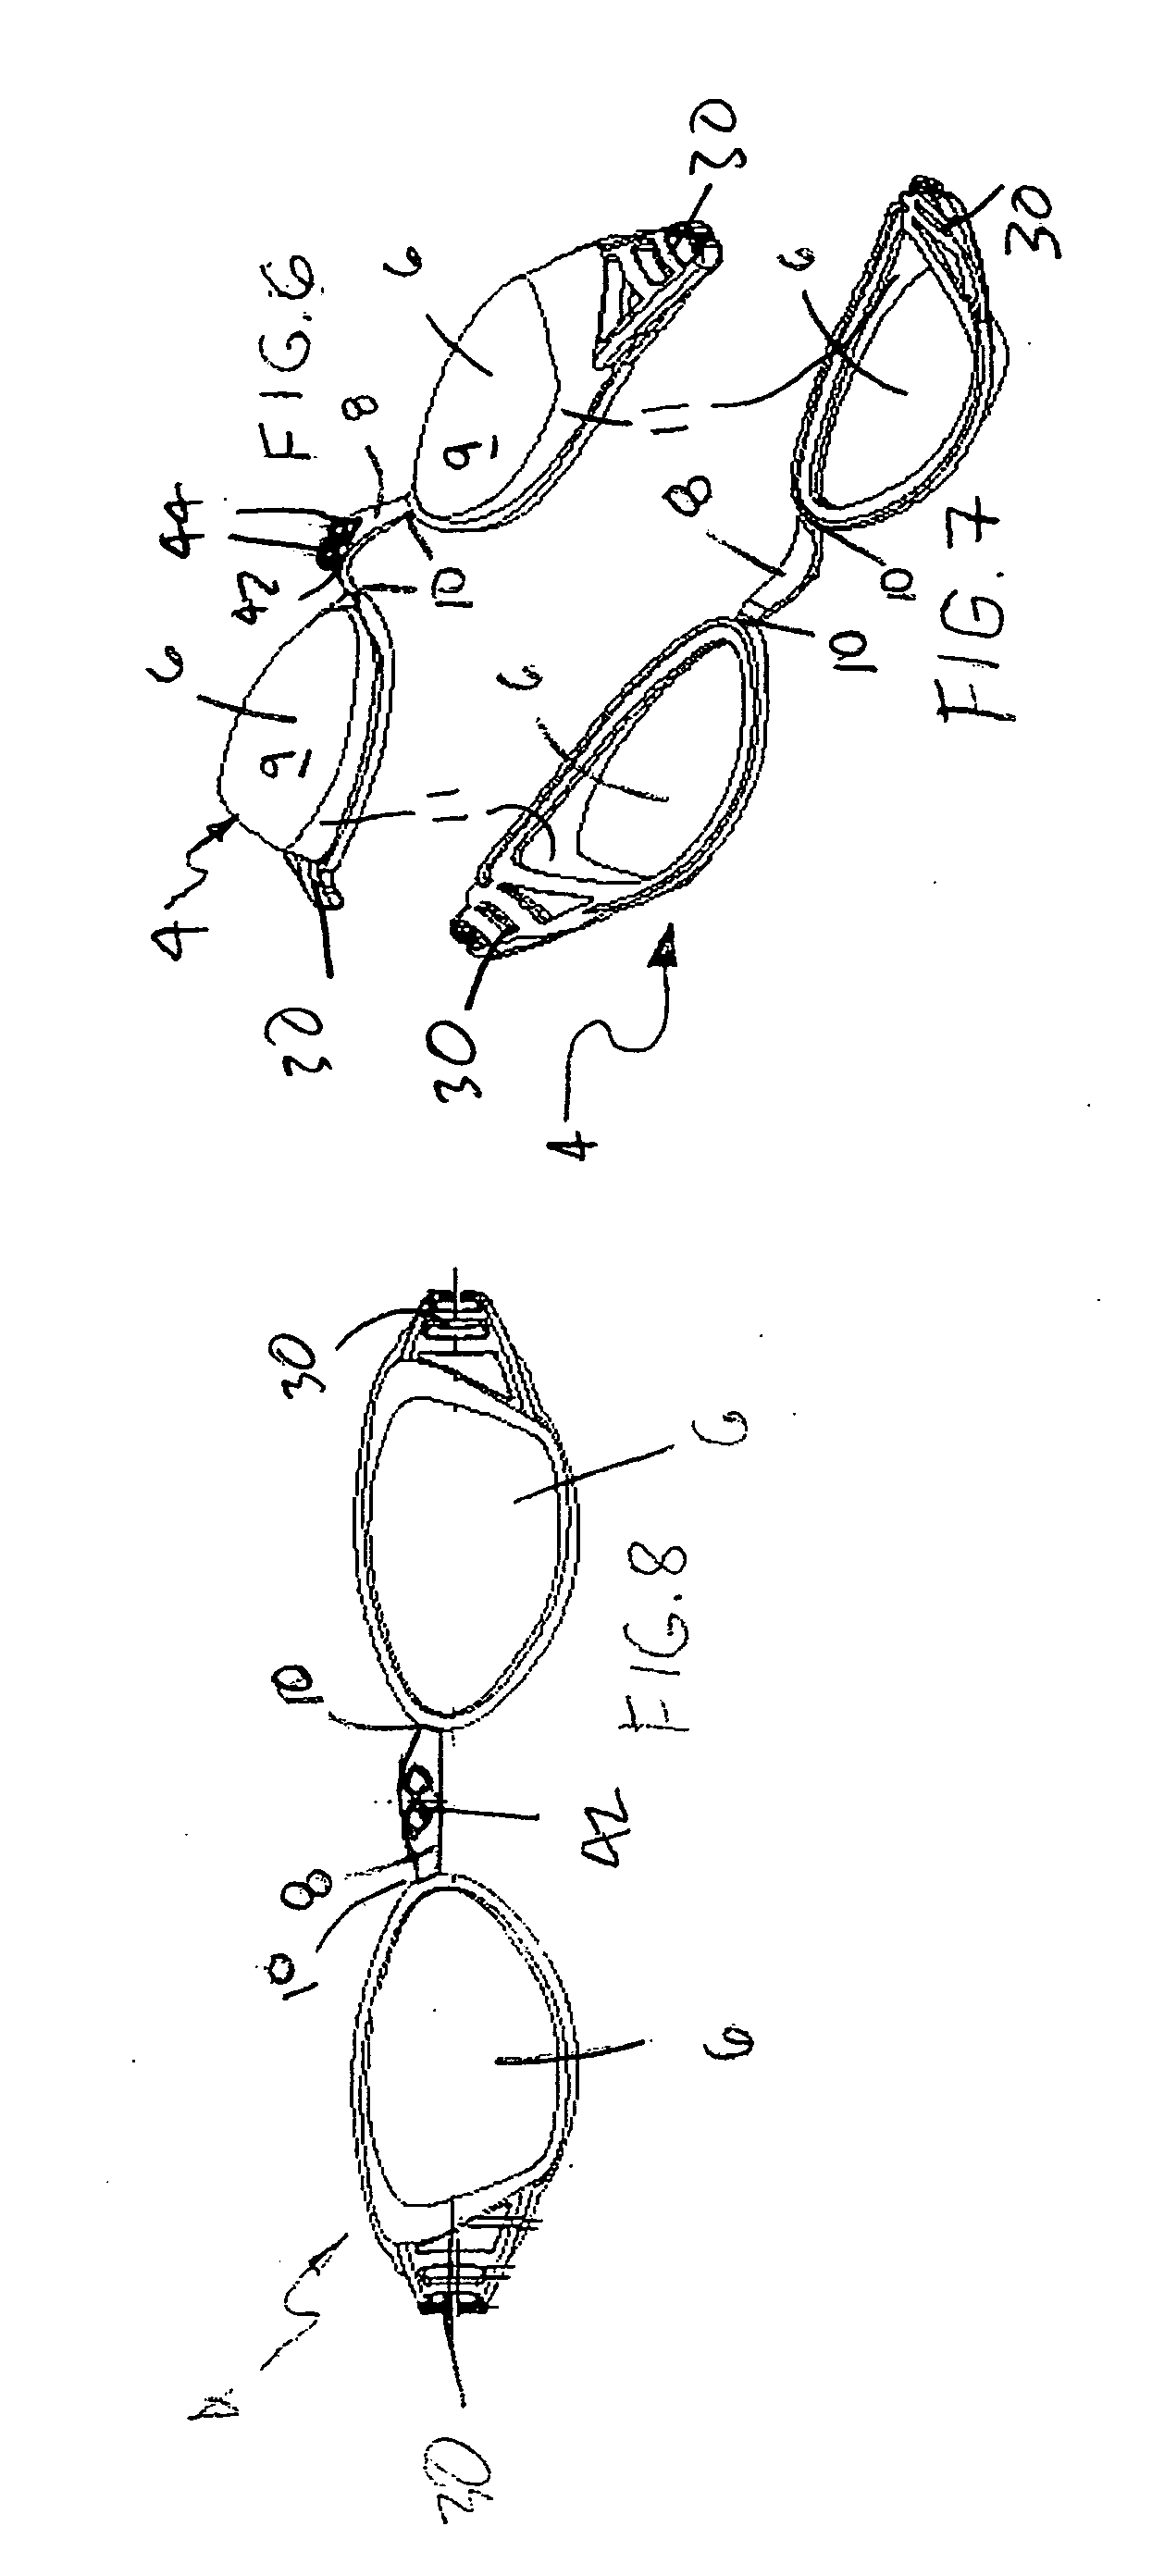 Eye goggles with unitary internal skeleton and overmoulded covering